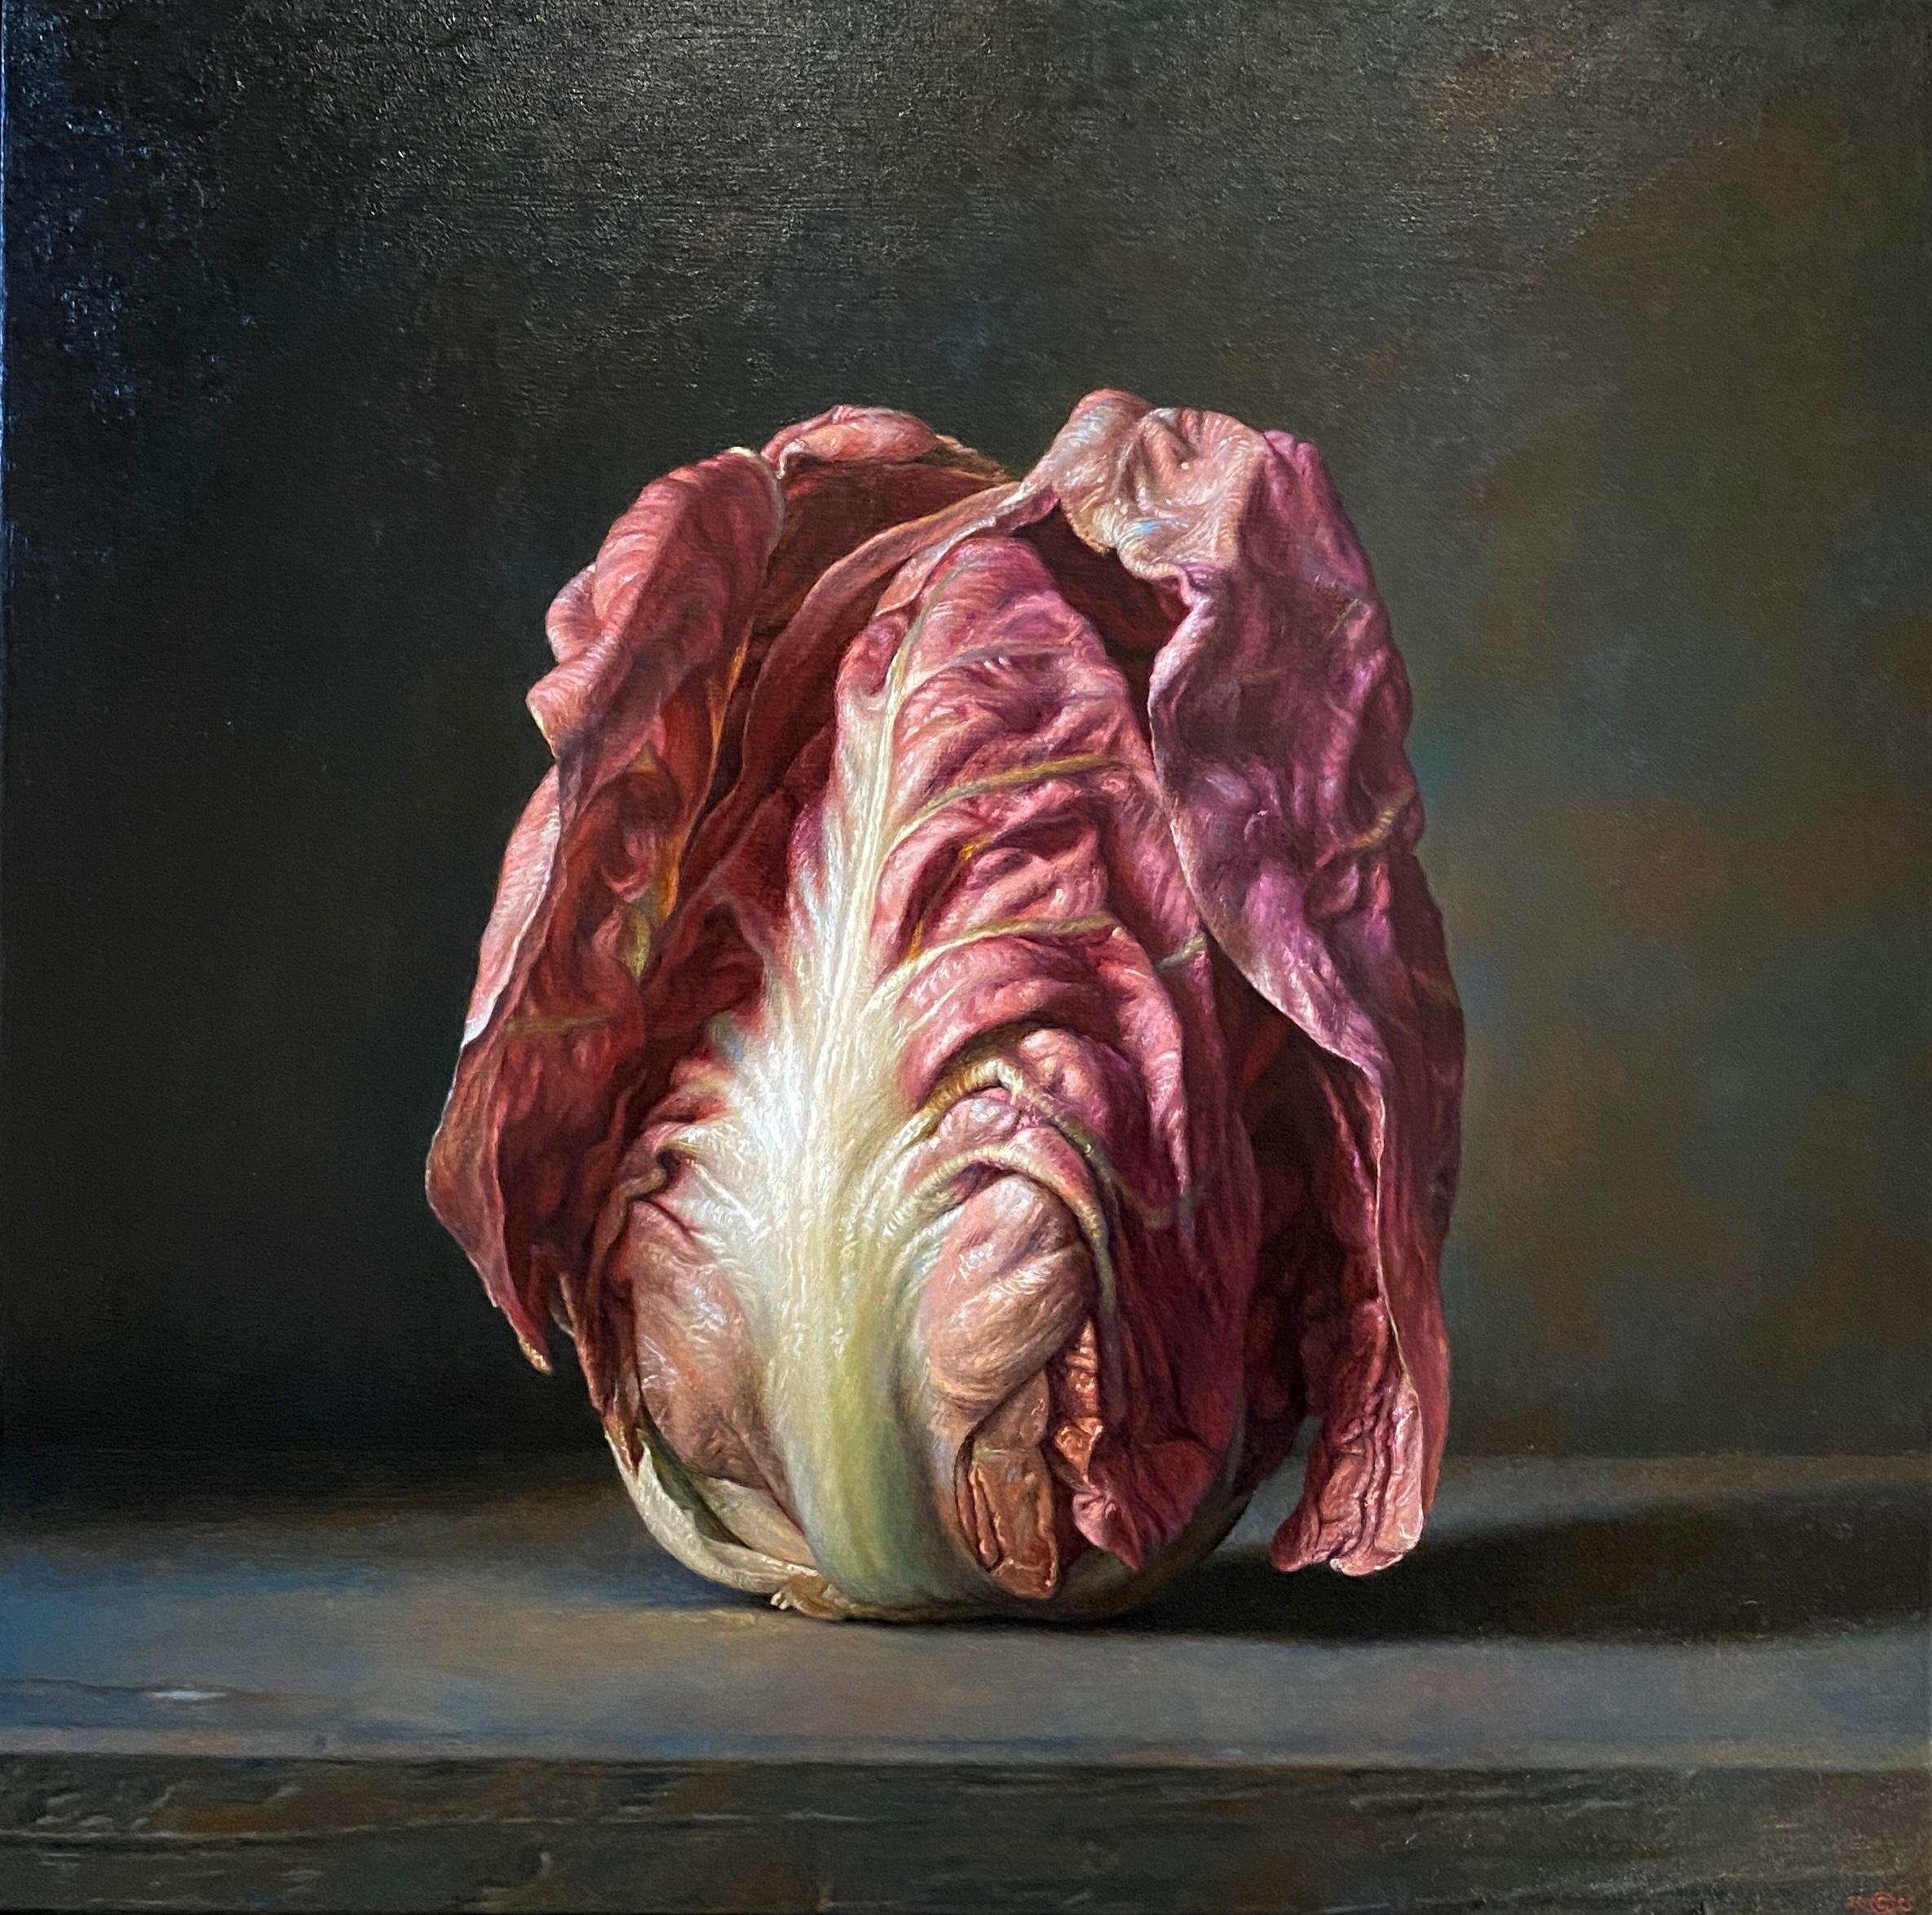 Gianluca Corona Figurative Painting - Red and violet radish still life over black background by expert italian painter